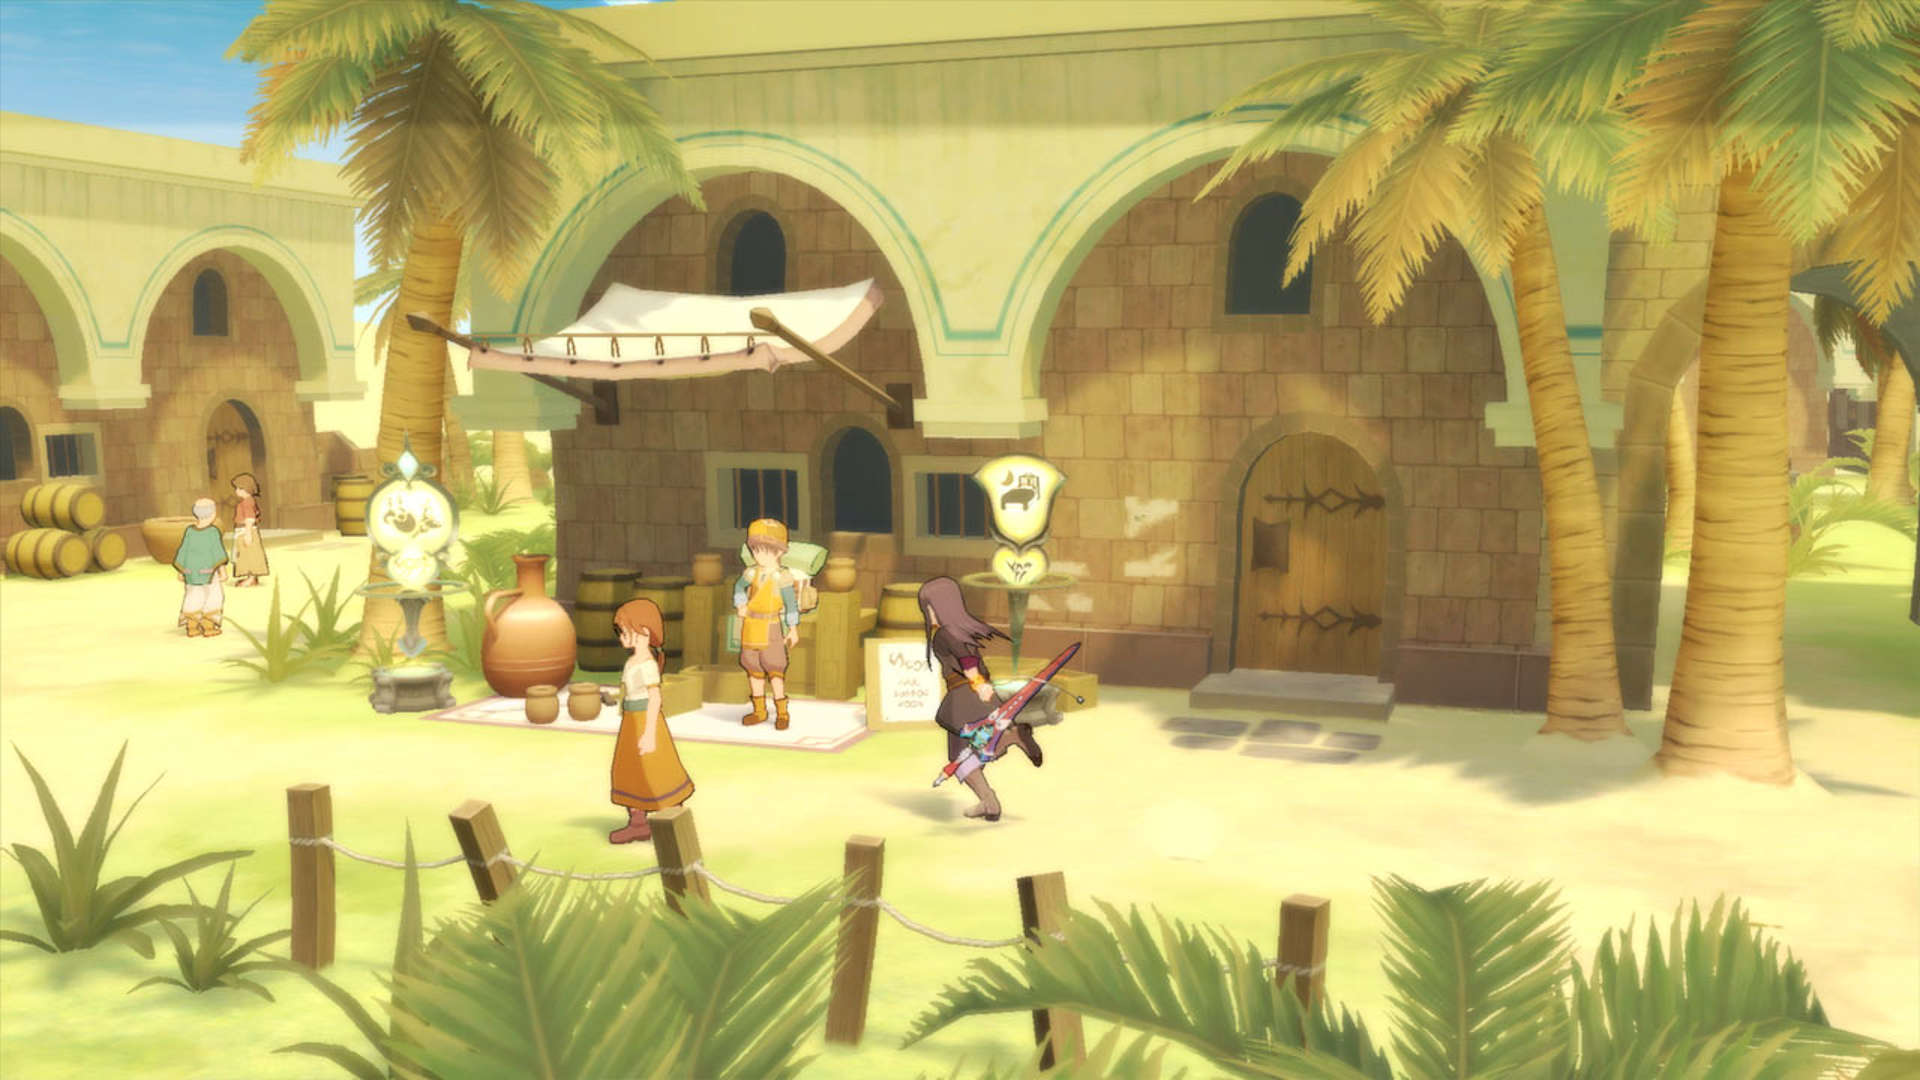 Best Switch RPGs - A long haired character runs through a town covered in sand